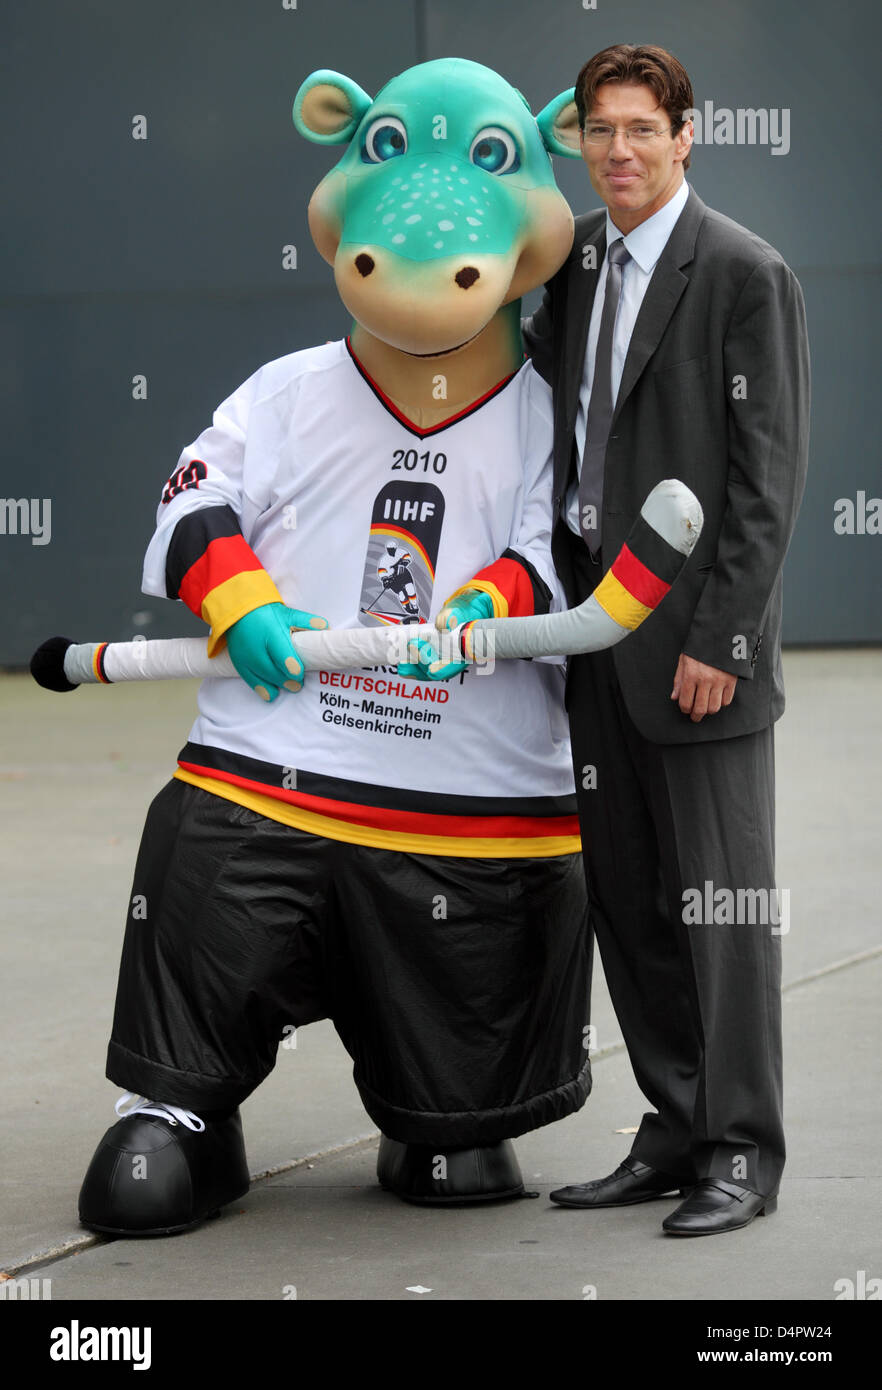 Uwe Krupp, head coach of Germany?s national ice hockey team, poses with the mascot for the Ice Hockey World Championships 2010 in Germany dubbed ?Urmel on the Ice? (?Urmel auf dem Eis?) during a photo call promoting the championships in Cologne, Germany, 02 September 2009. The Ice Hockey World Championships 2010 will take place in Germany from 07 May to 23 May 2010. Photo: Felix He Stock Photo